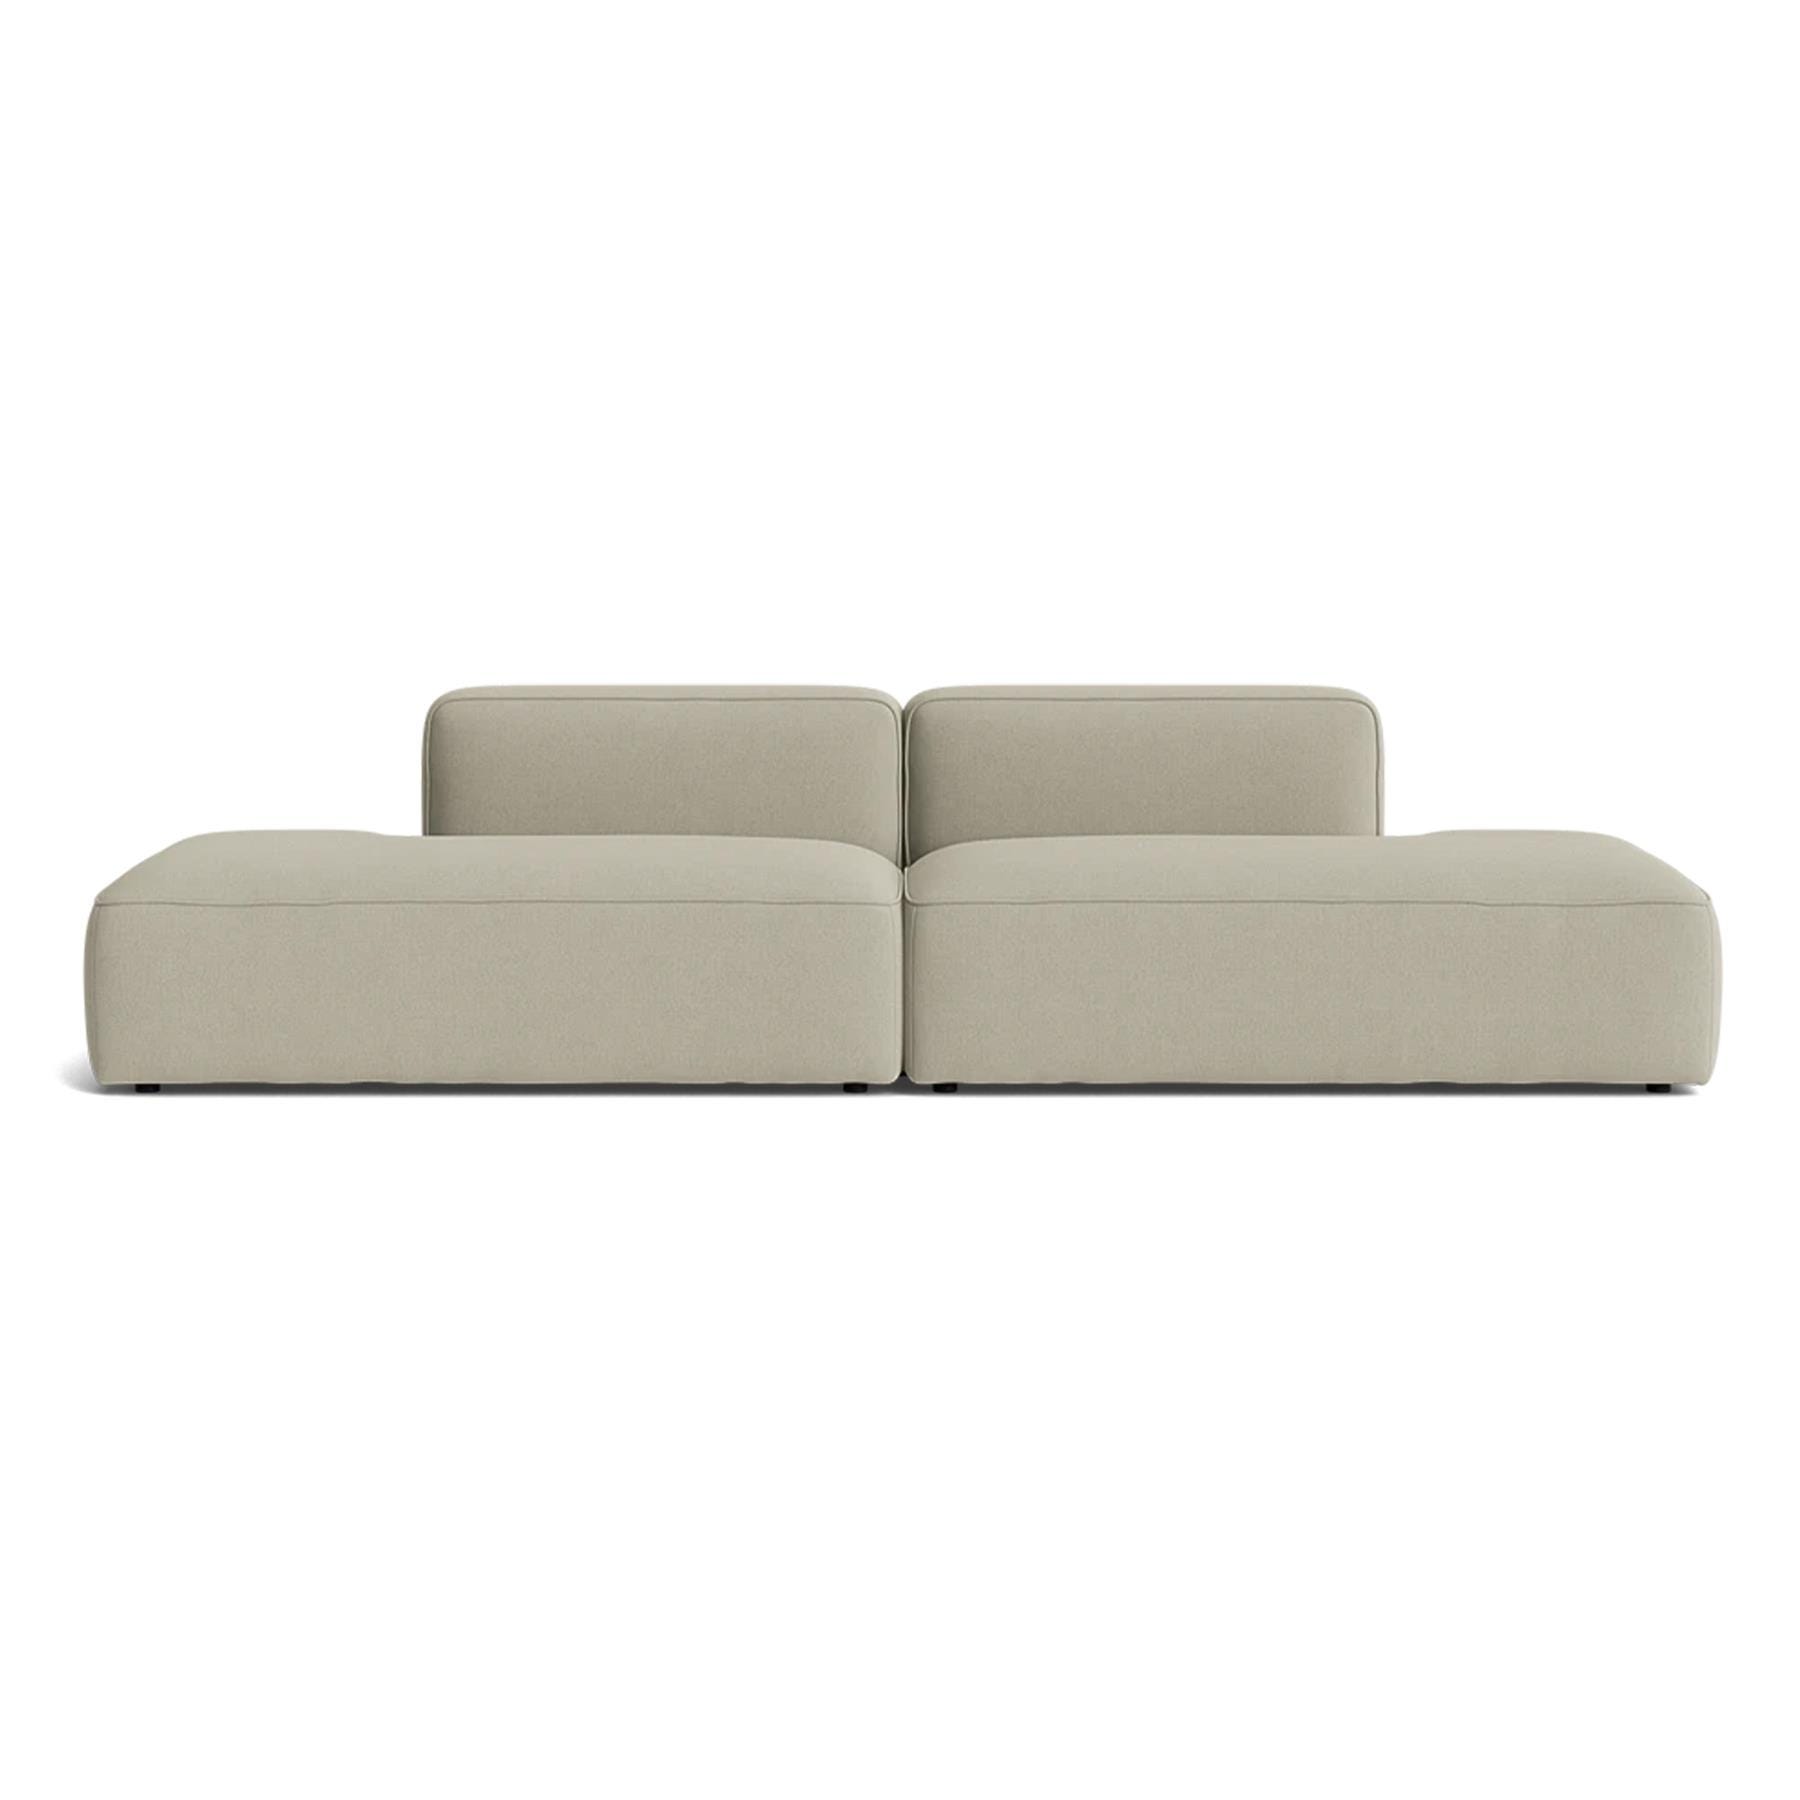 Make Nordic Basecamp Xl Sofa With 2 Open Ends Fiord 322 Brown Designer Furniture From Holloways Of Ludlow